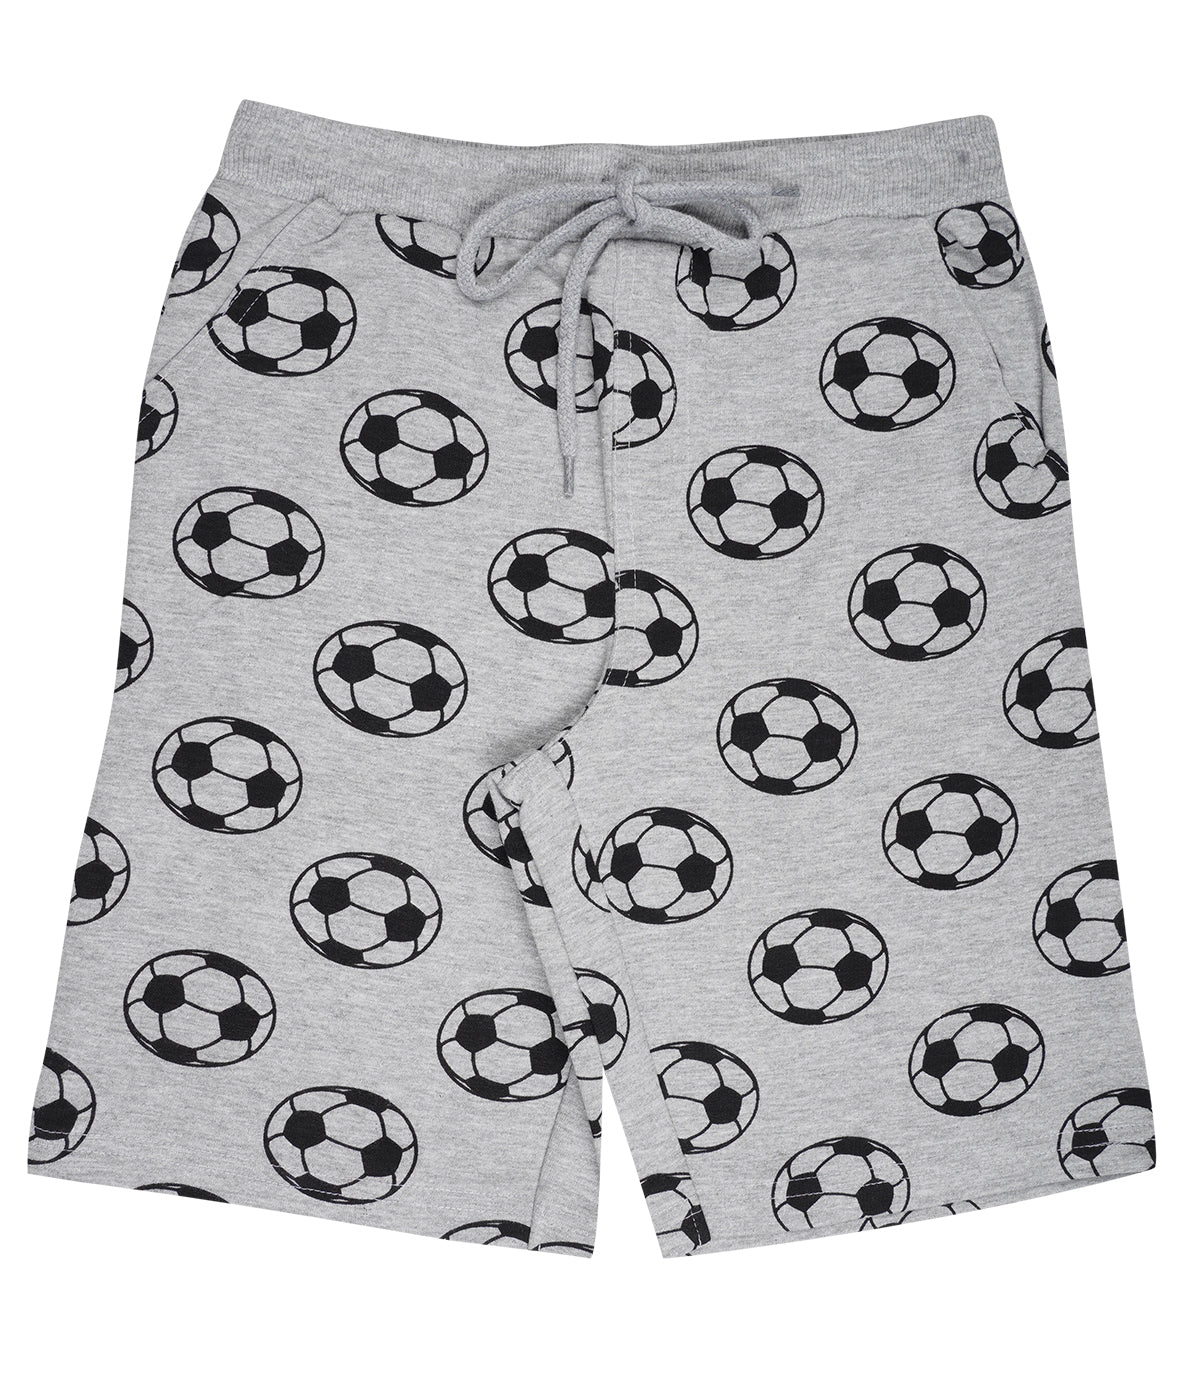 Yalzz Short For Boys Casual Printed Pure Cotton Grey Pack of 1